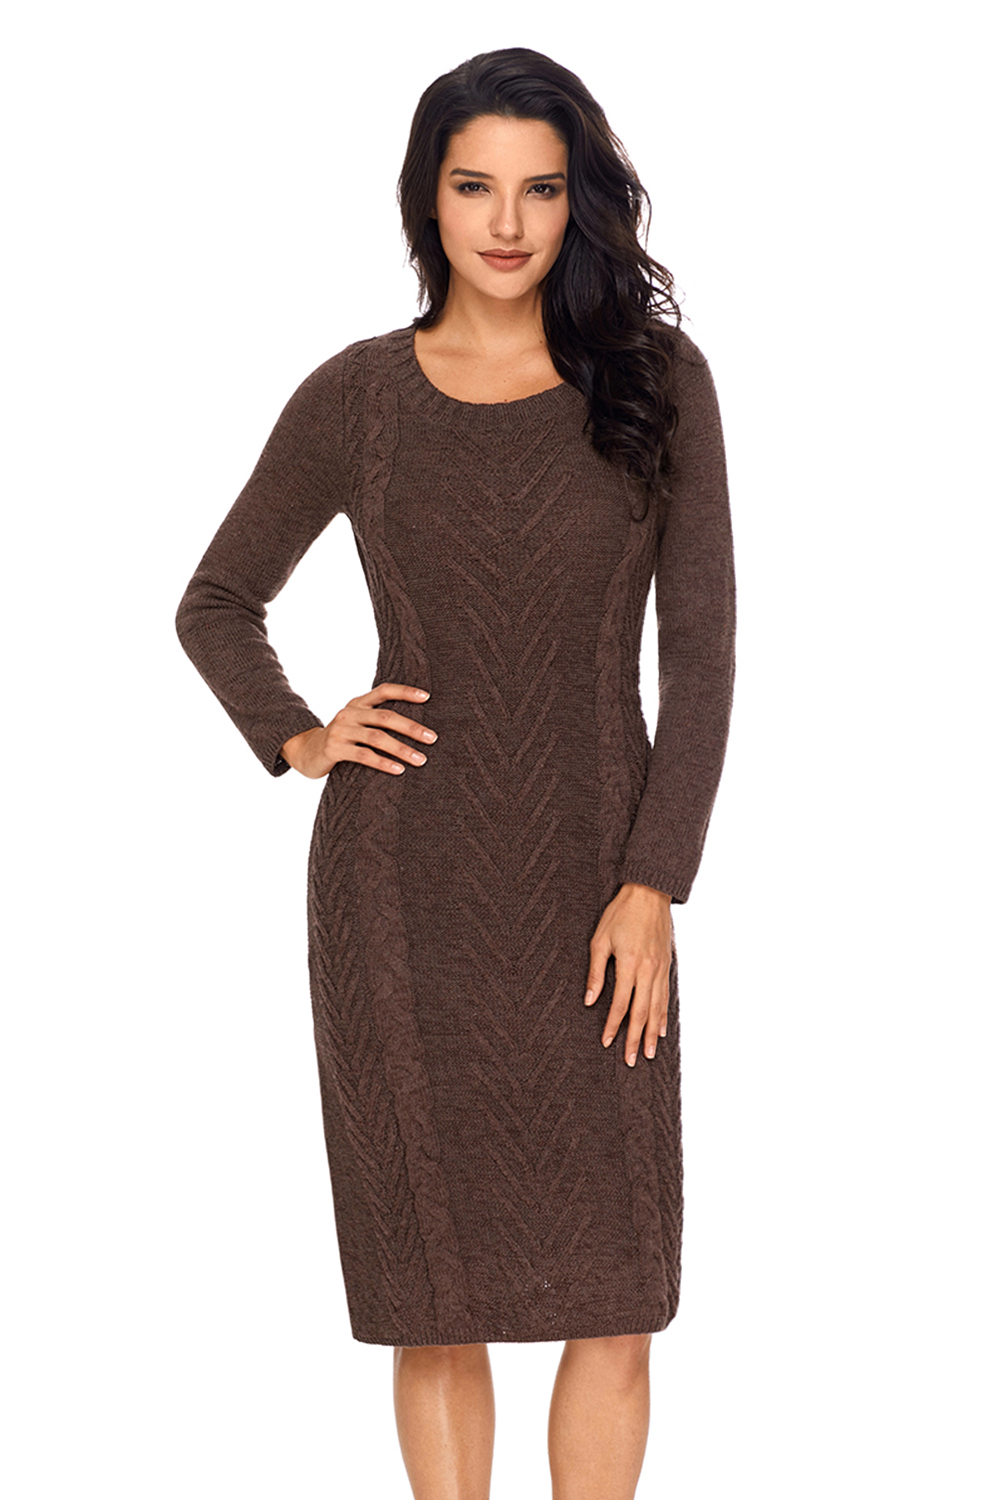 BY27772-17 Coffee Women’s Hand Knitted Sweater Dress